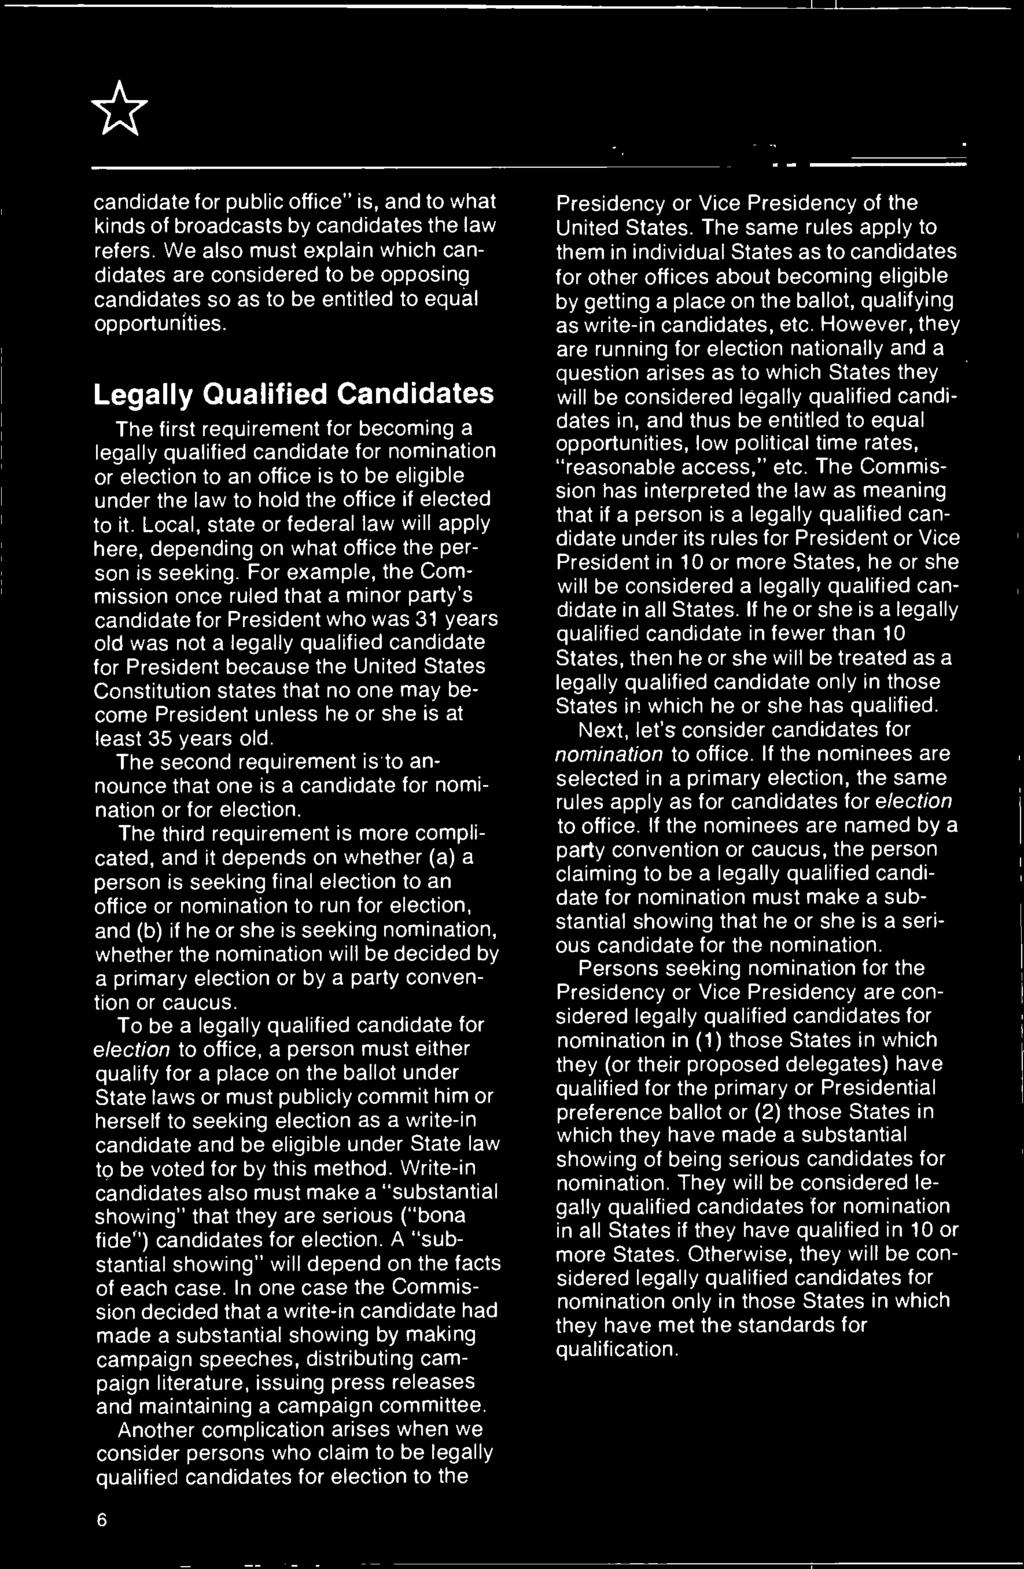 Legally Qualified Candidates The first requirement for becoming a legally qualified candidate for nomination or election to an office is to be eligible under the law to hold the office if elected to